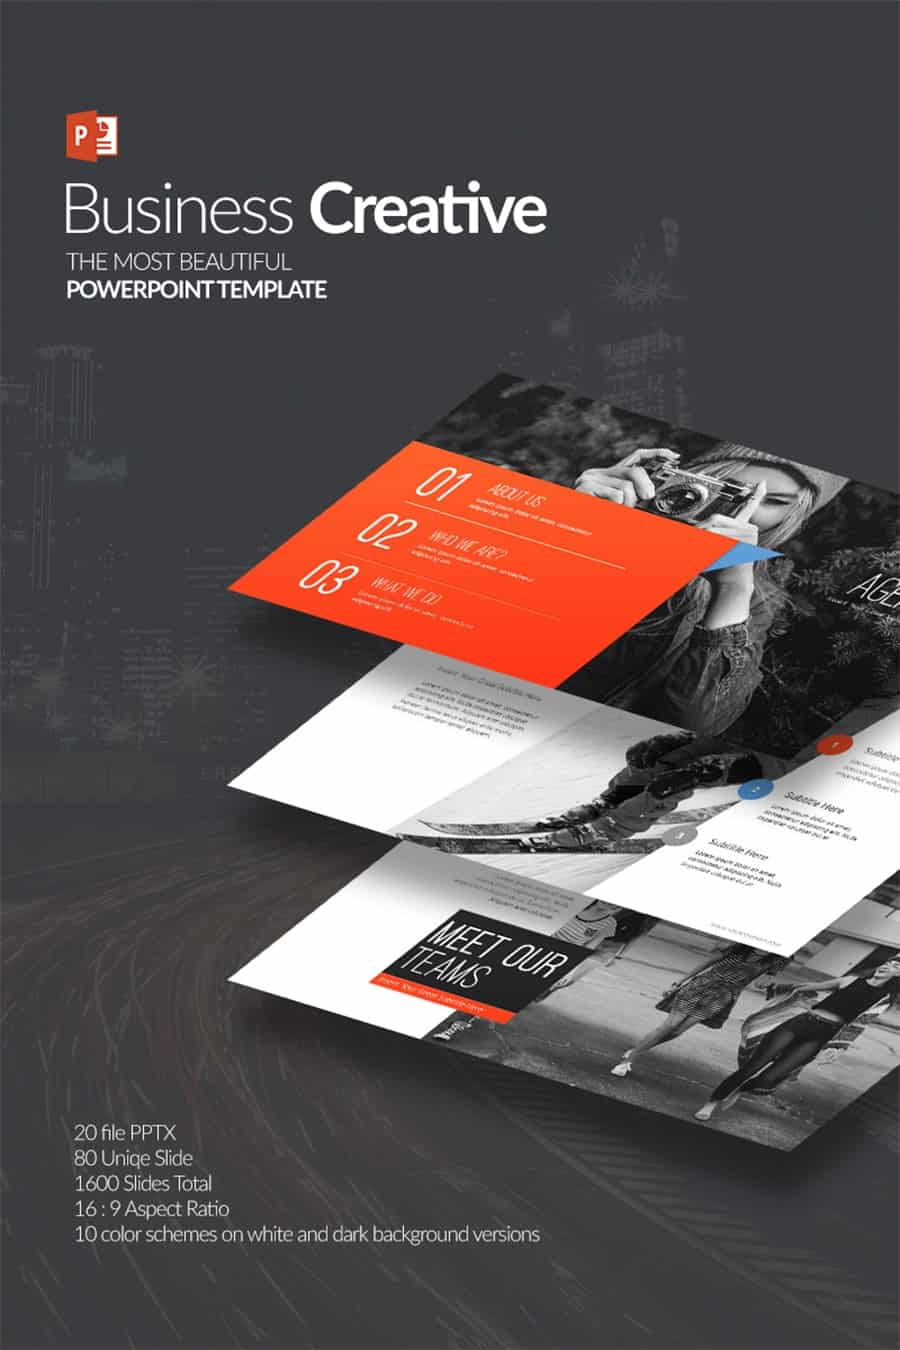 Marketing Agency Powerpoint Template